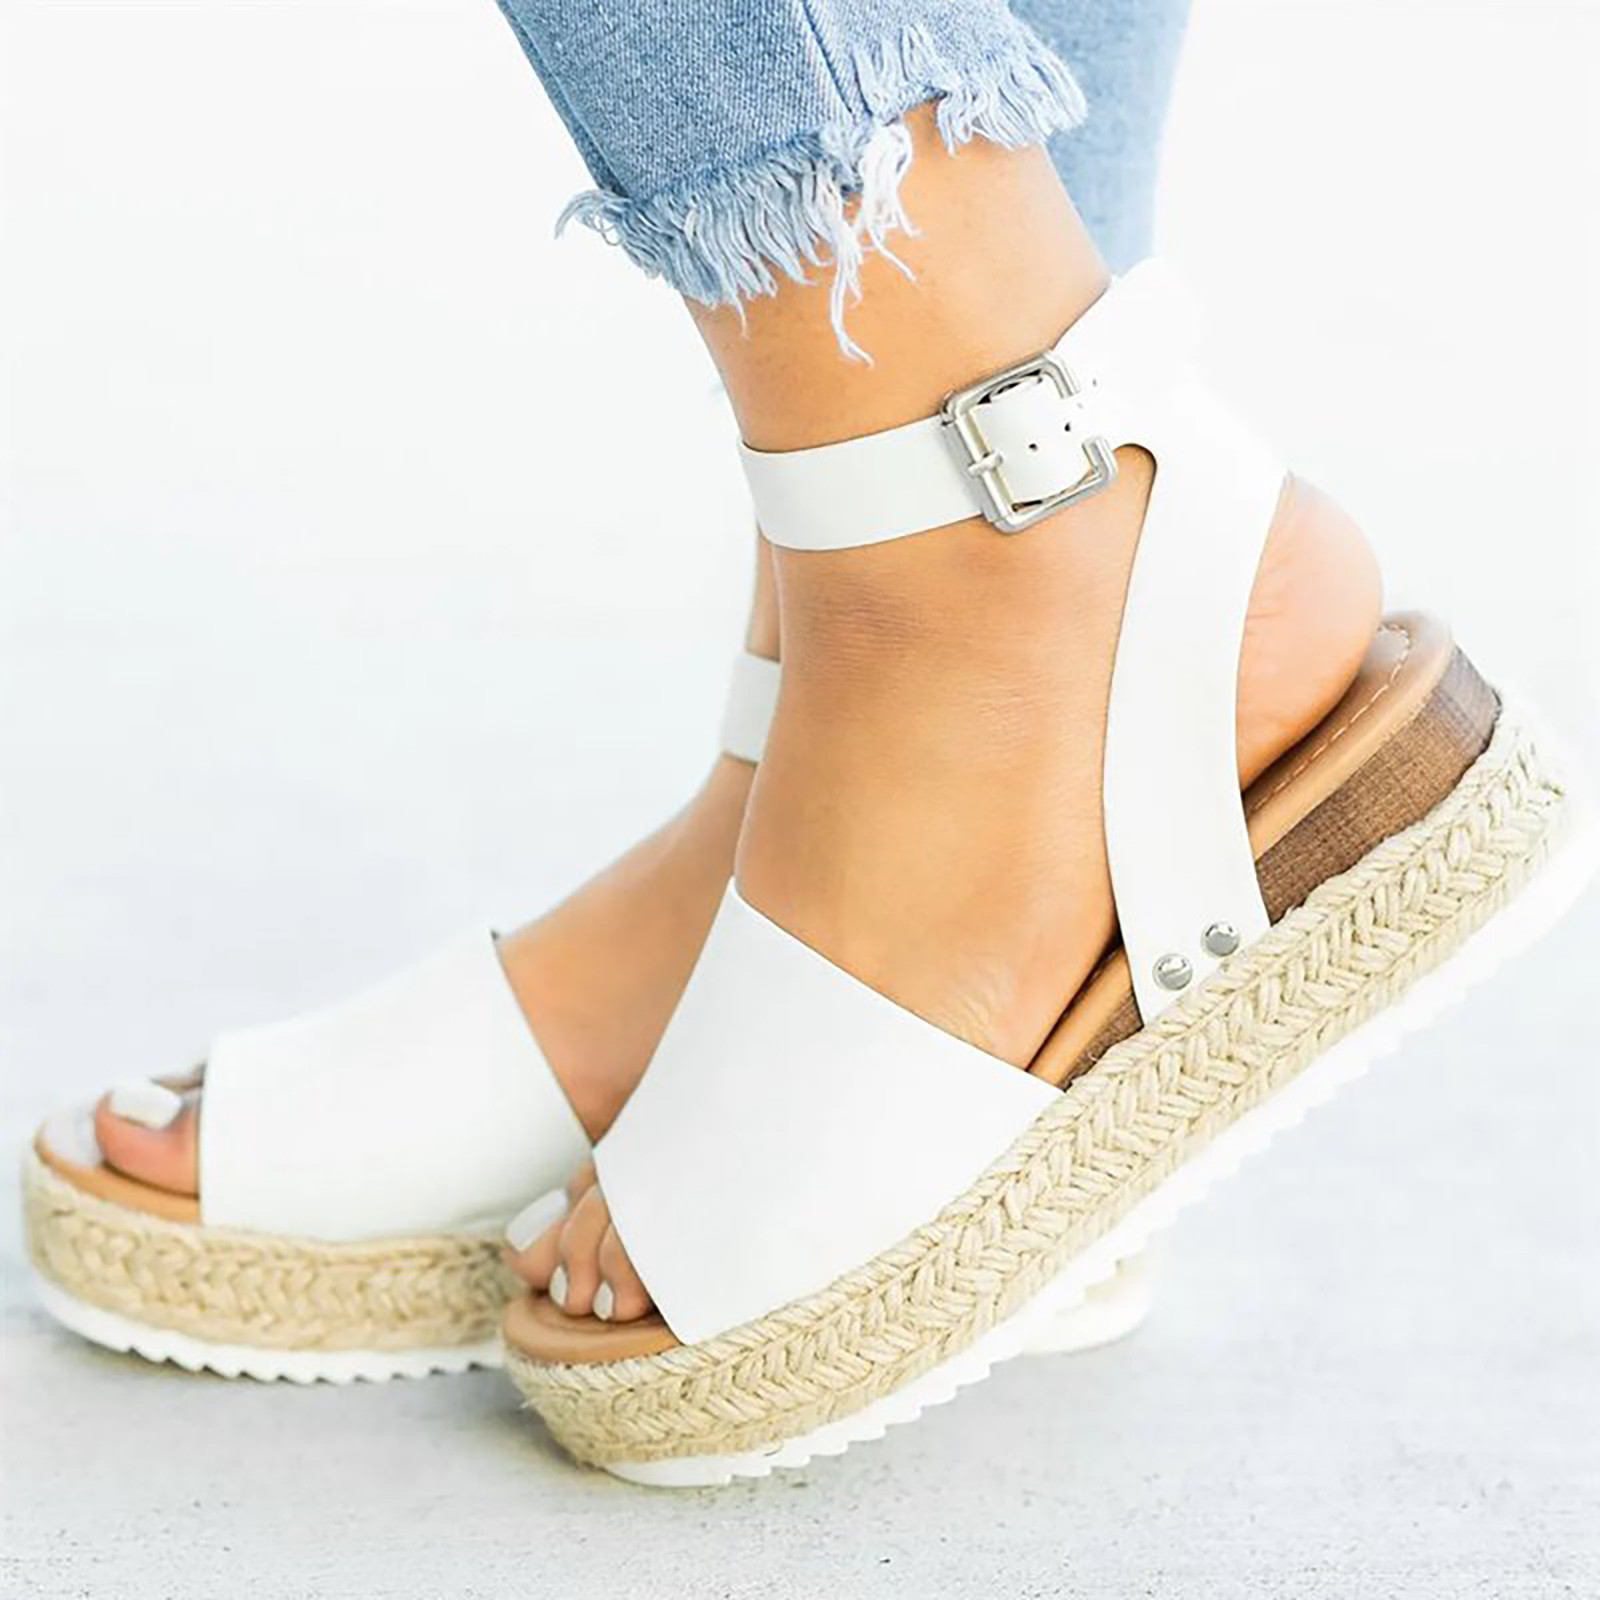 Azrian Woman Summer Sandals Open toe Casual Platform Wedge Shoes Casual Canvas Shoes - image 1 of 3